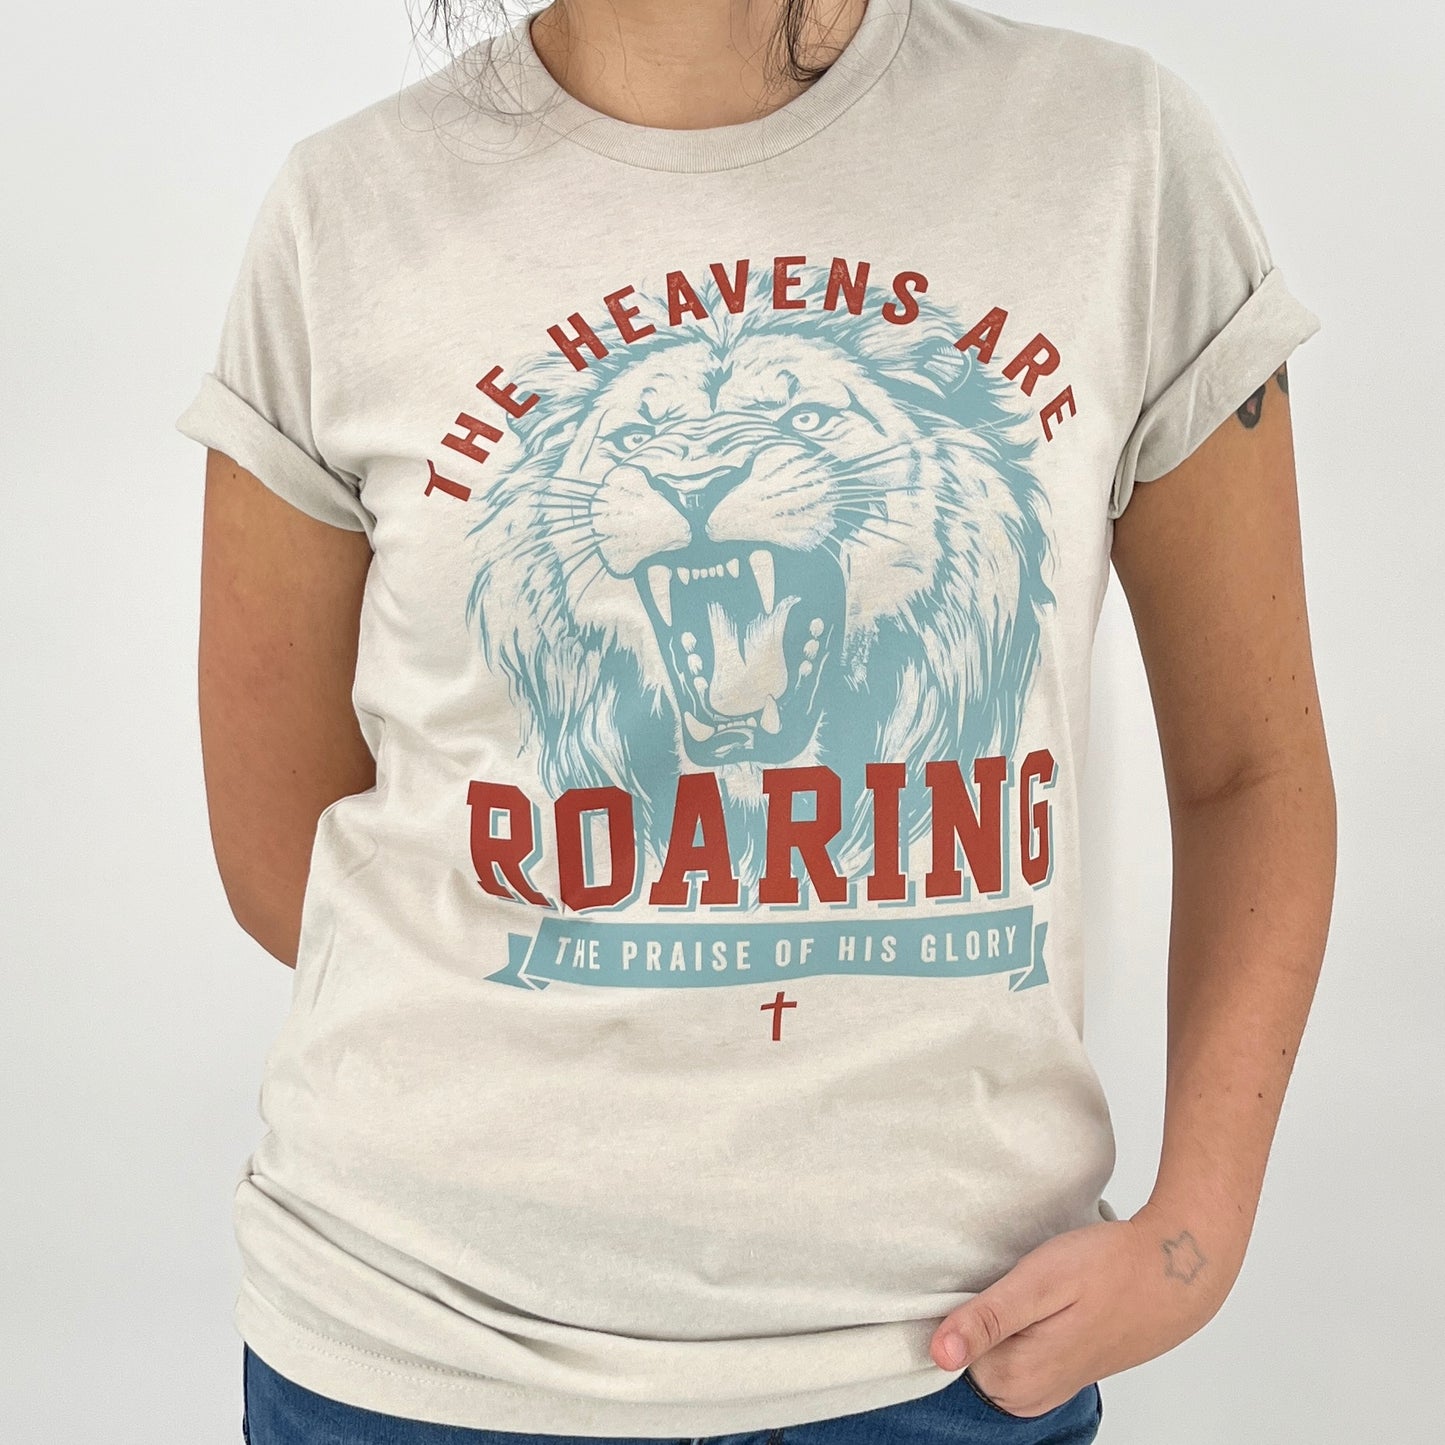 The heavens are roaring (Lion) tee